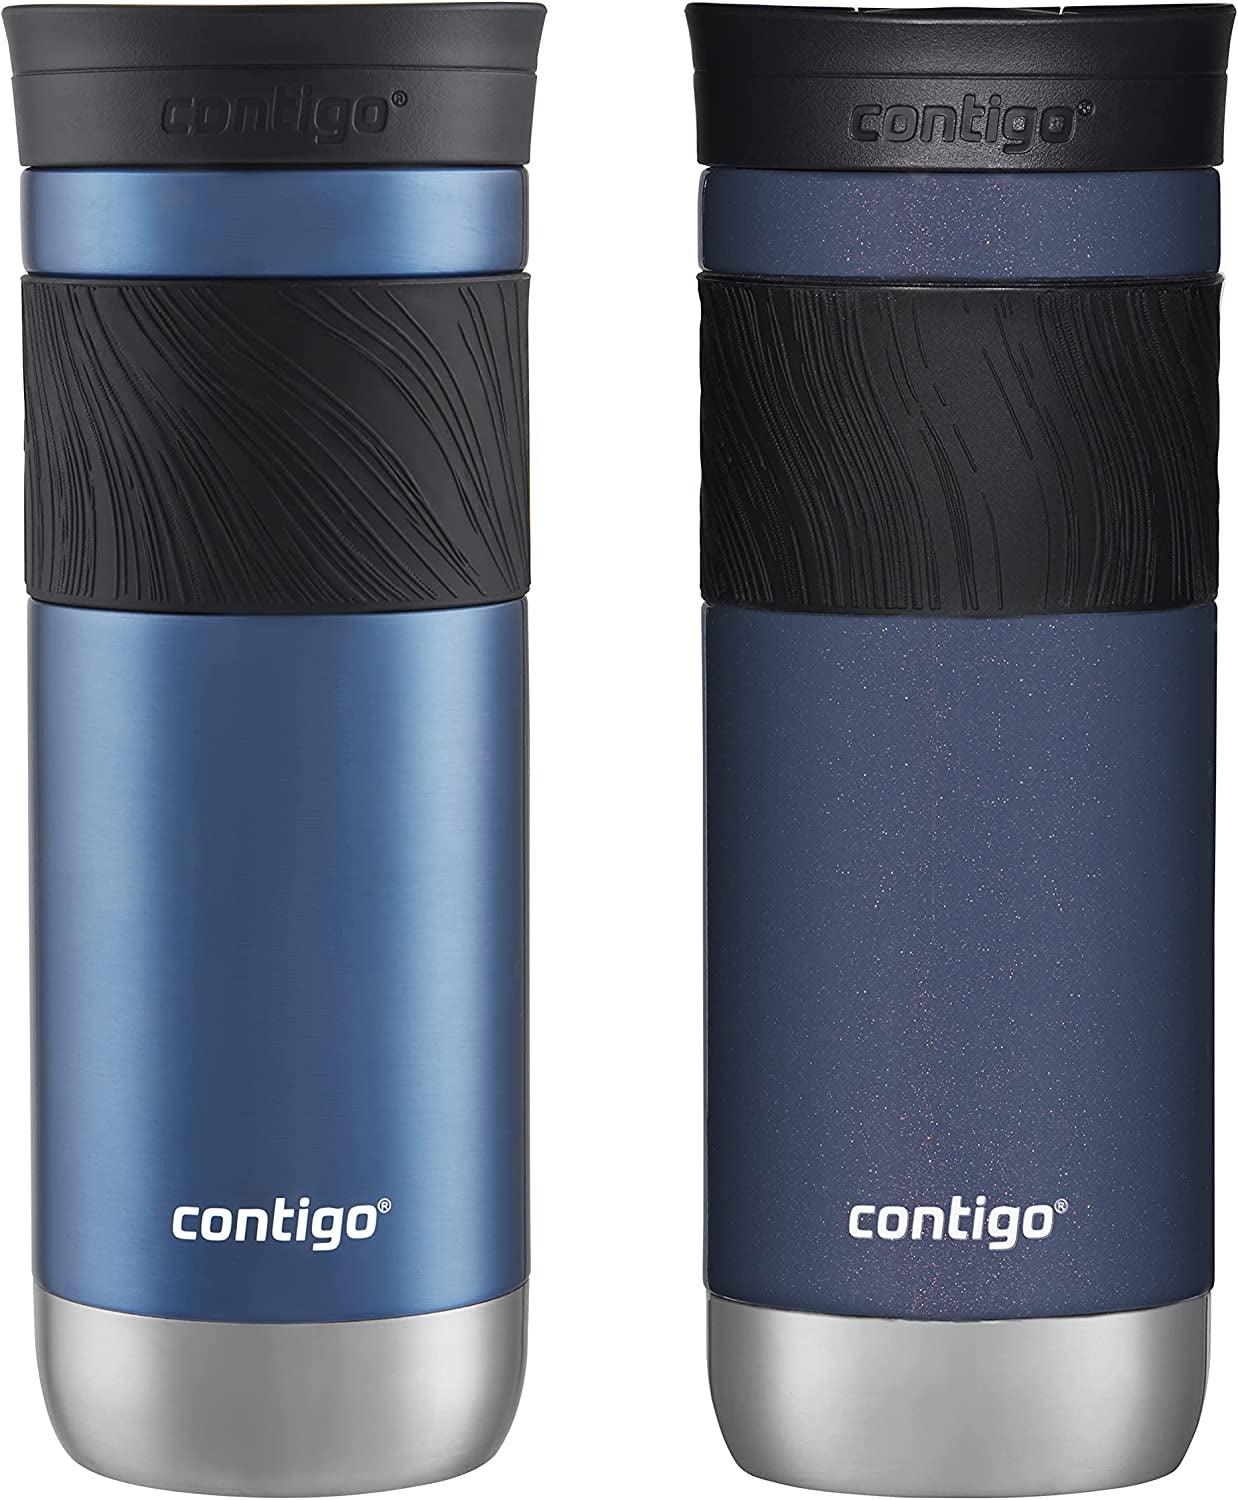 Contigo Byron Vacuum-Insulated Stainless Steel Travel Mug with Leak-Proof Lid, Reusable Coffee Cup or Water Bottle, Bpa-Free, Keeps Drinks Hot or Cold for Hours, 20Oz, Blue Corn